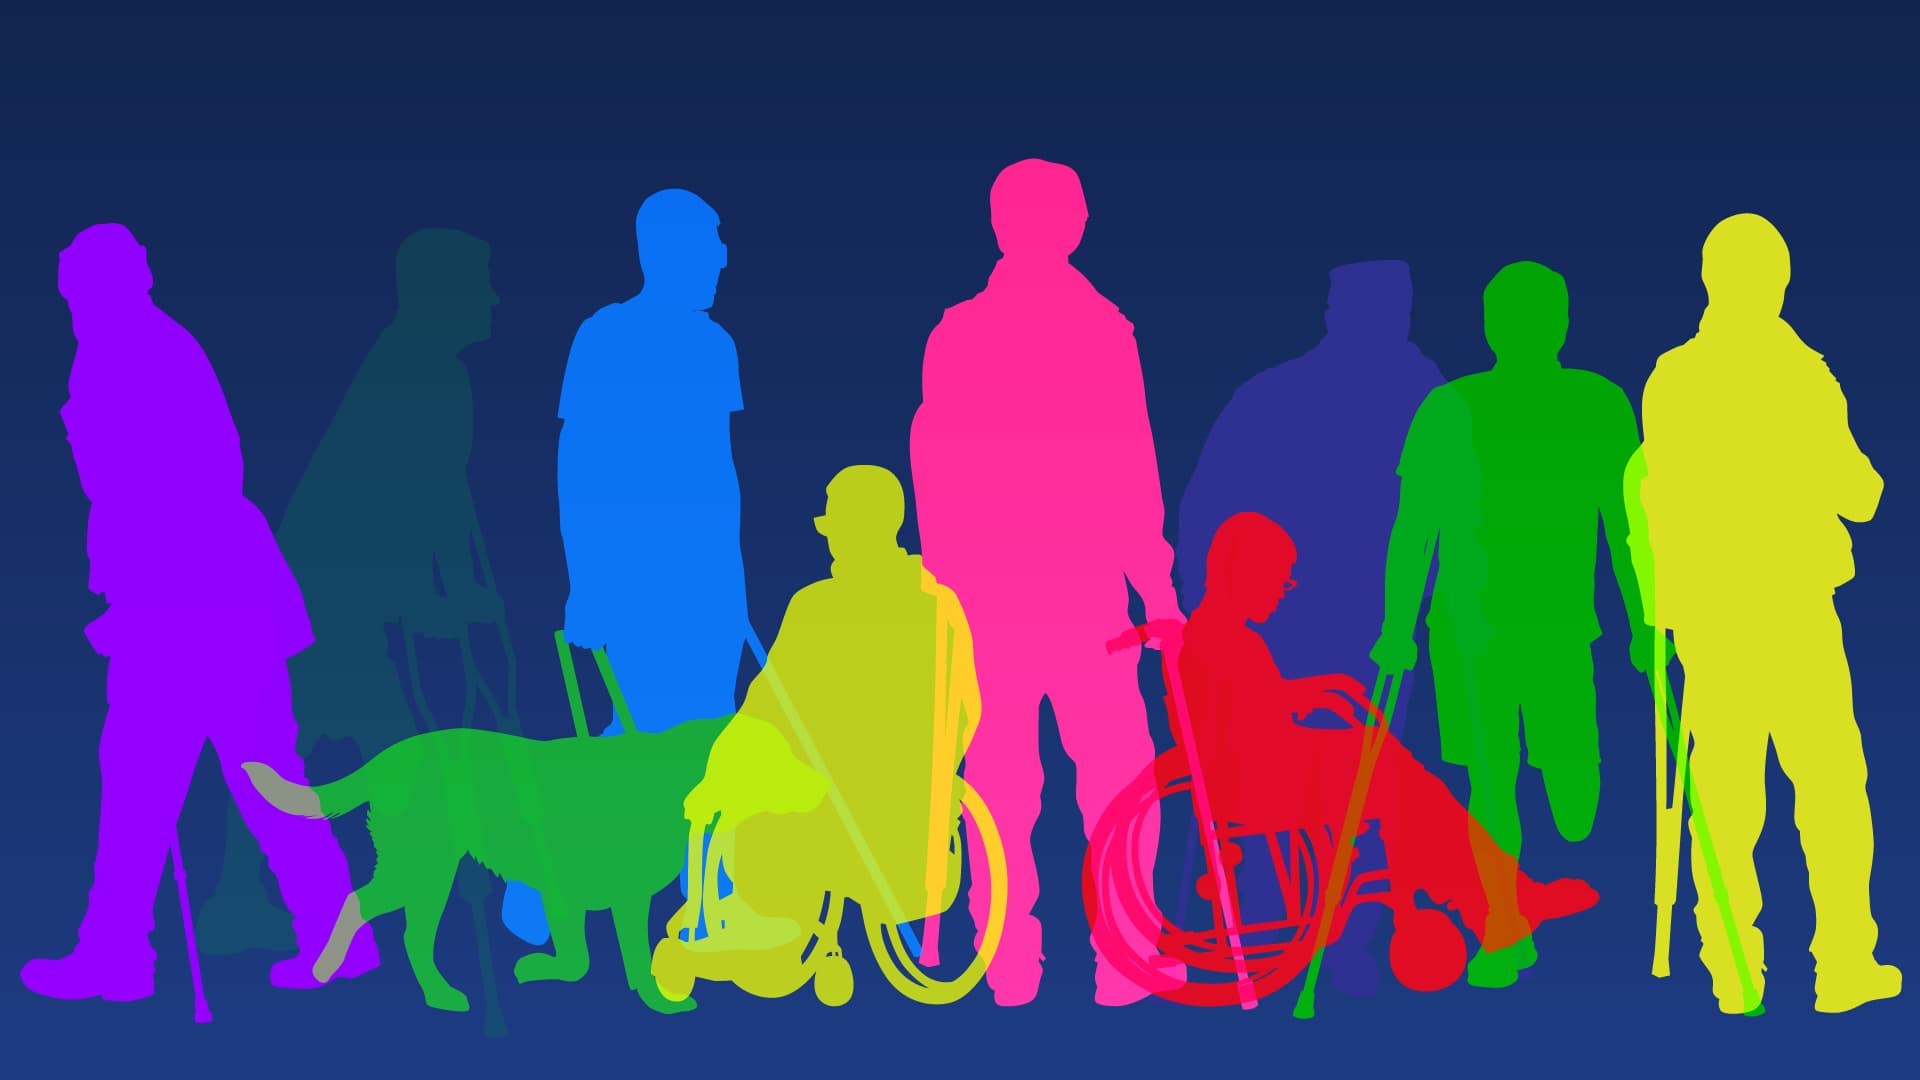 illustration of colorful silhouettes of people with variouis disabilities